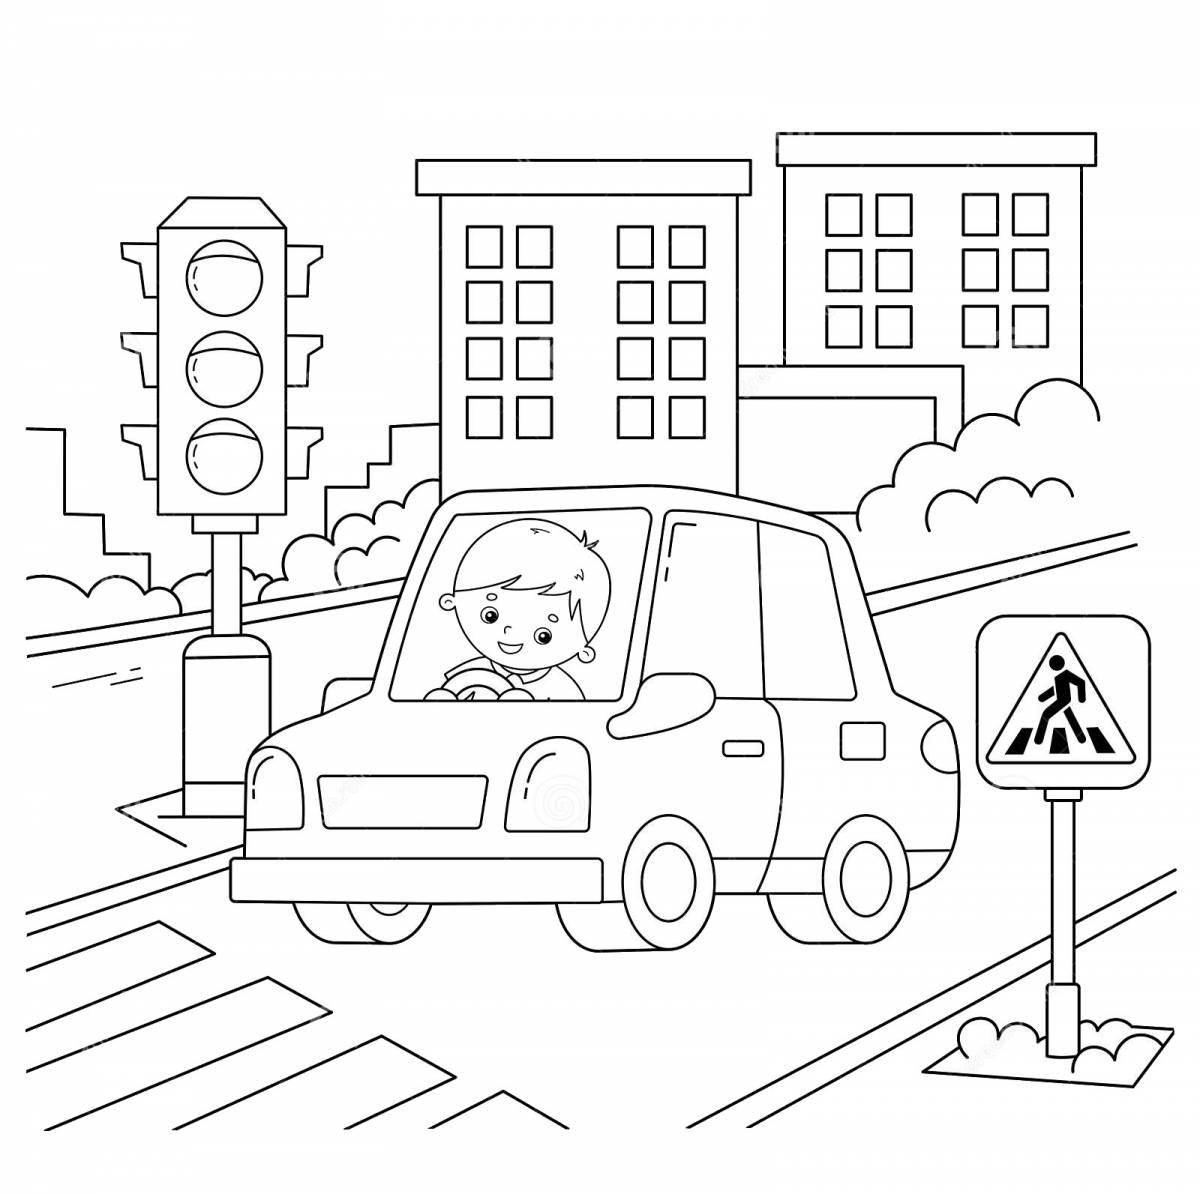 Charming traffic rules coloring for grade 2